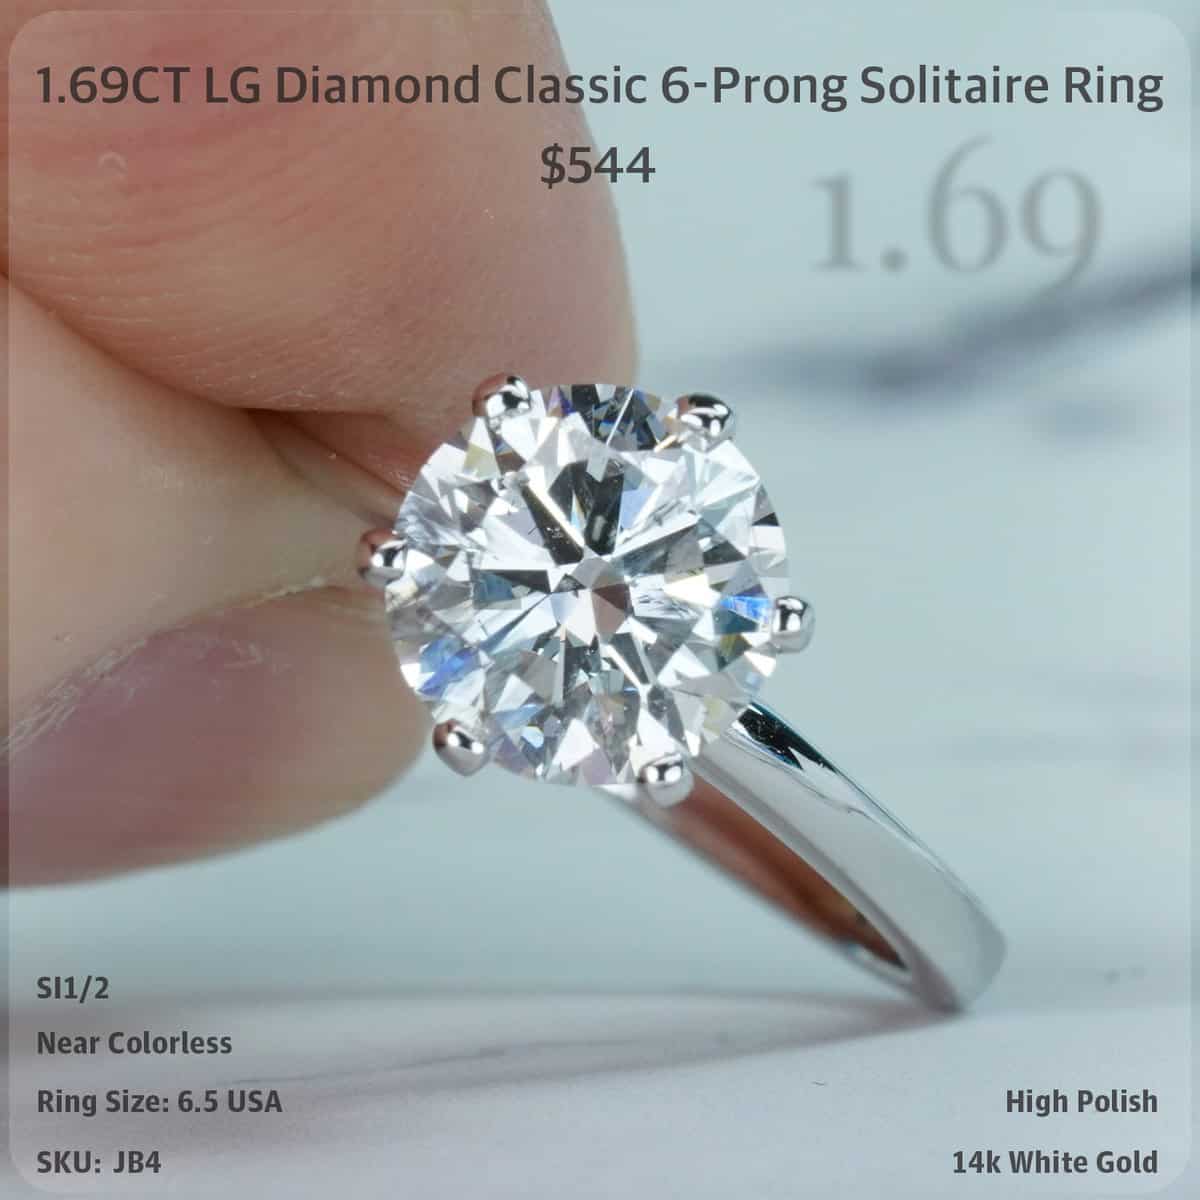 1.69CT LG Diamond Classic 6-Prong Solitaire Ring